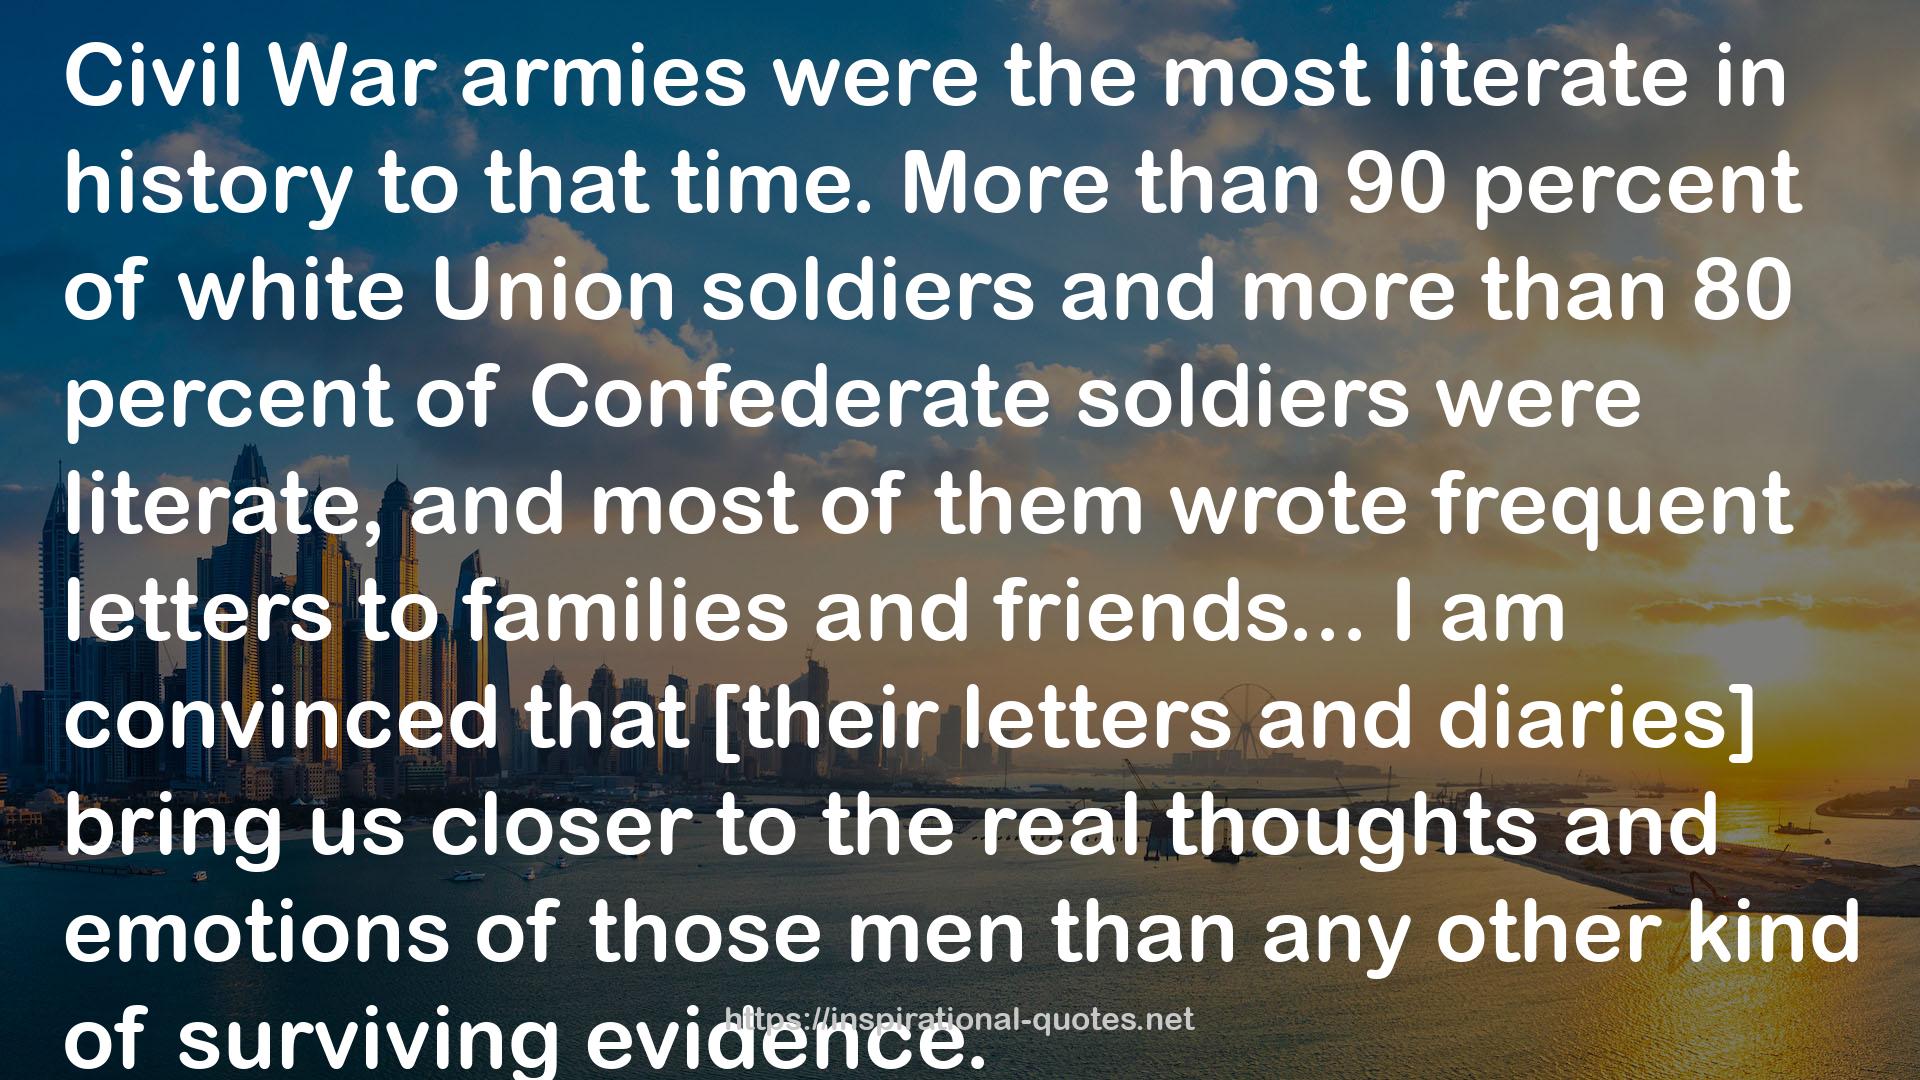 For Cause and Comrades: Why Men Fought in the Civil War QUOTES